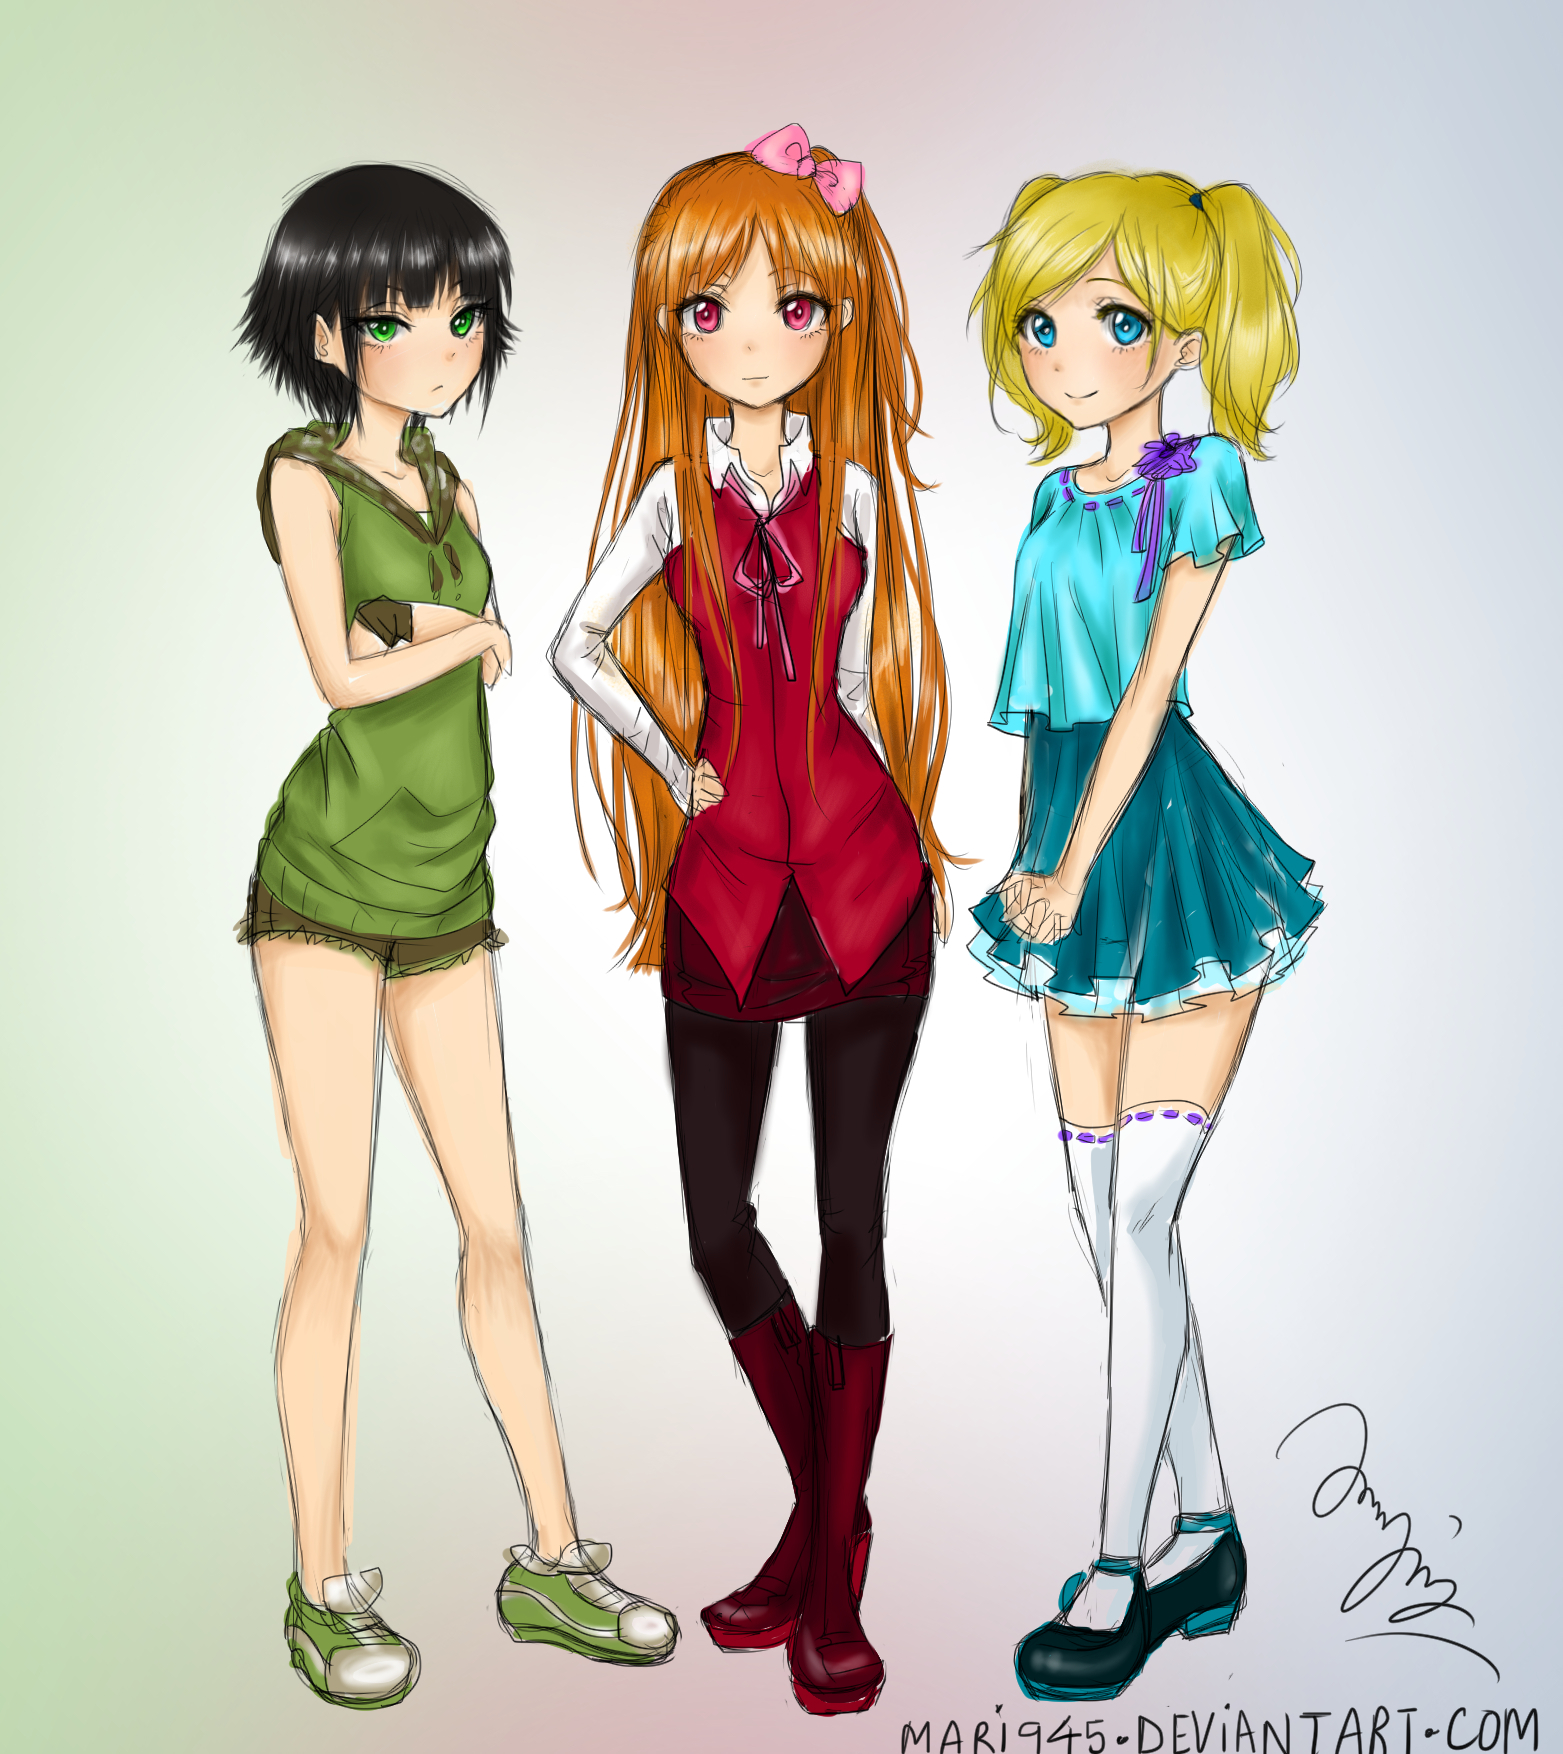 powerpuffgirls ppg redesigned Sugar Spice and everything nice.